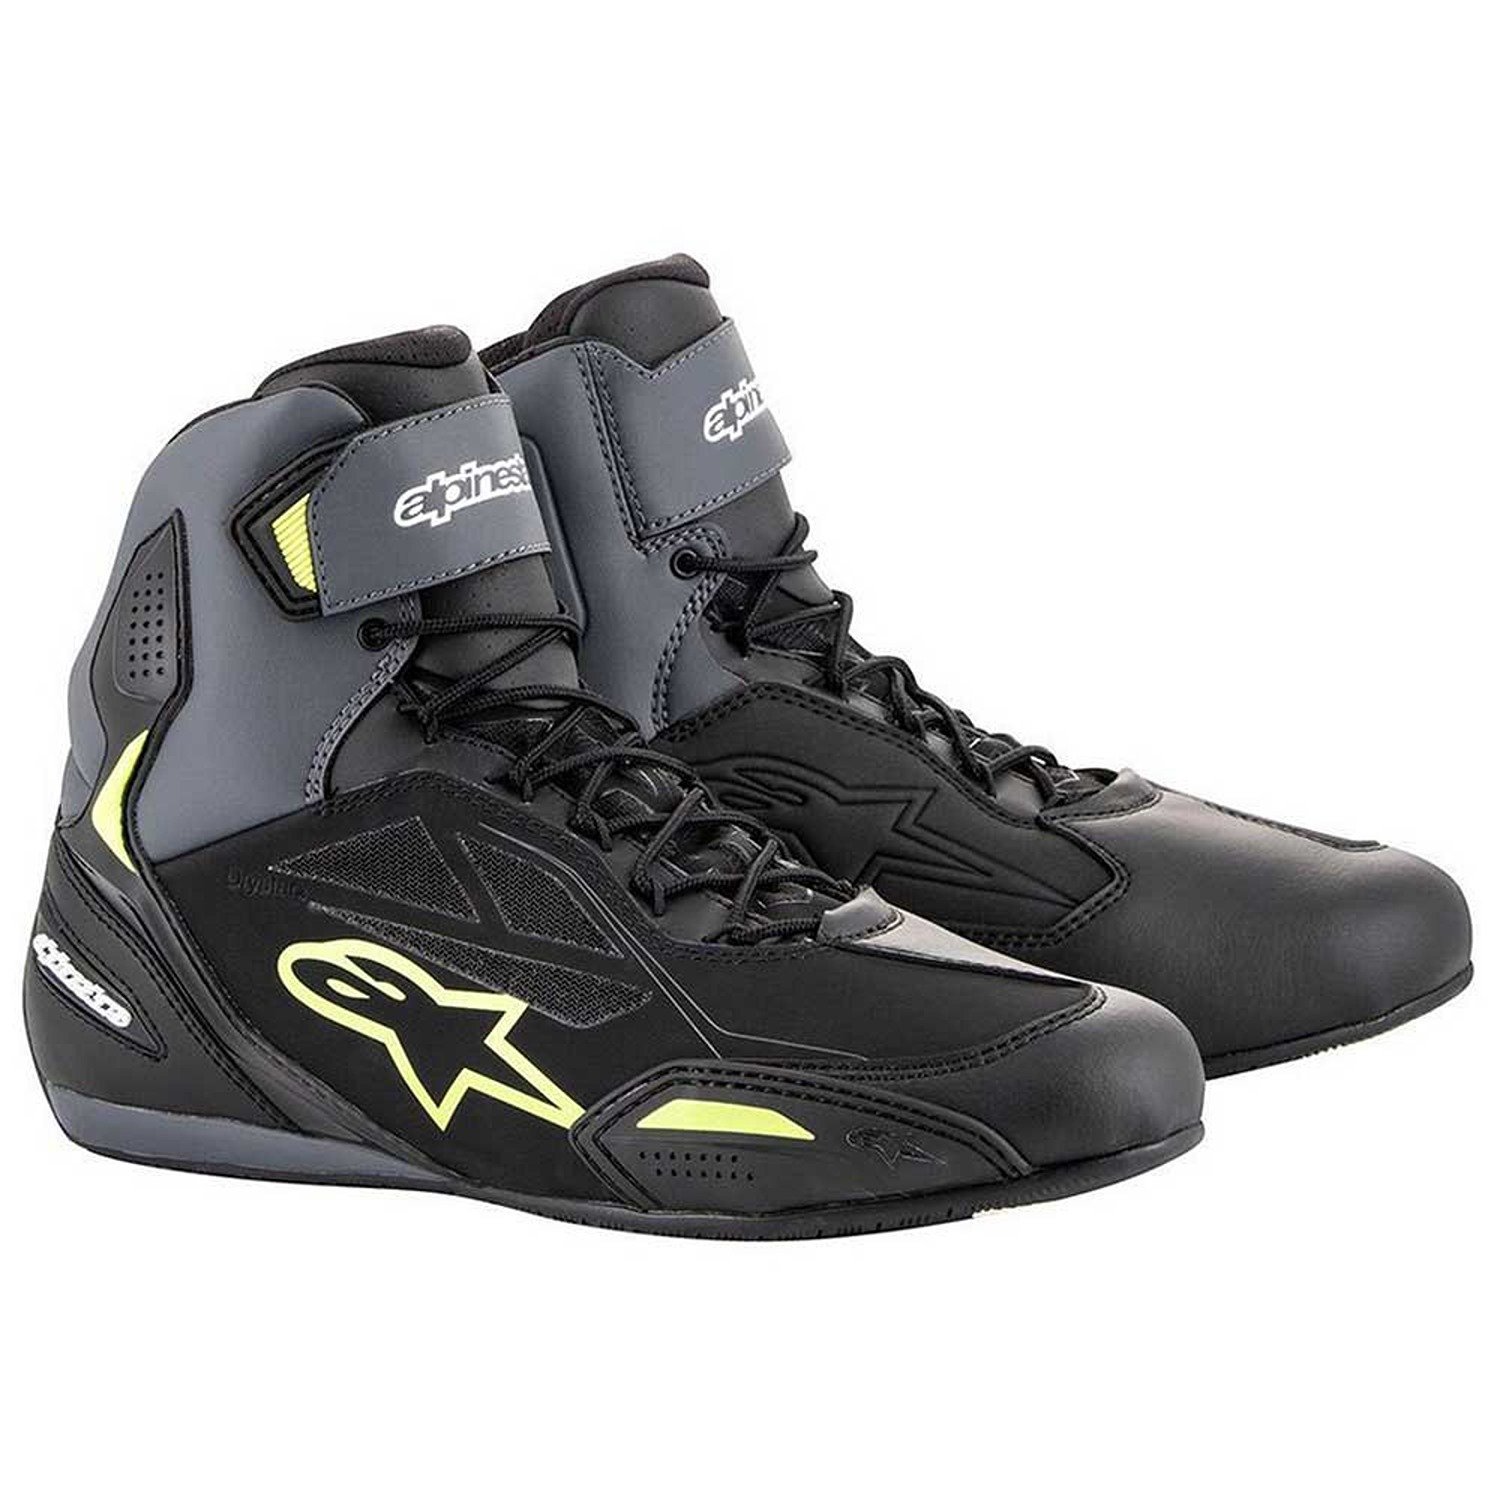 Image of Alpinestars Faster-3 Shoes Black Yellow Fluo Size US 105 ID 8059347331119